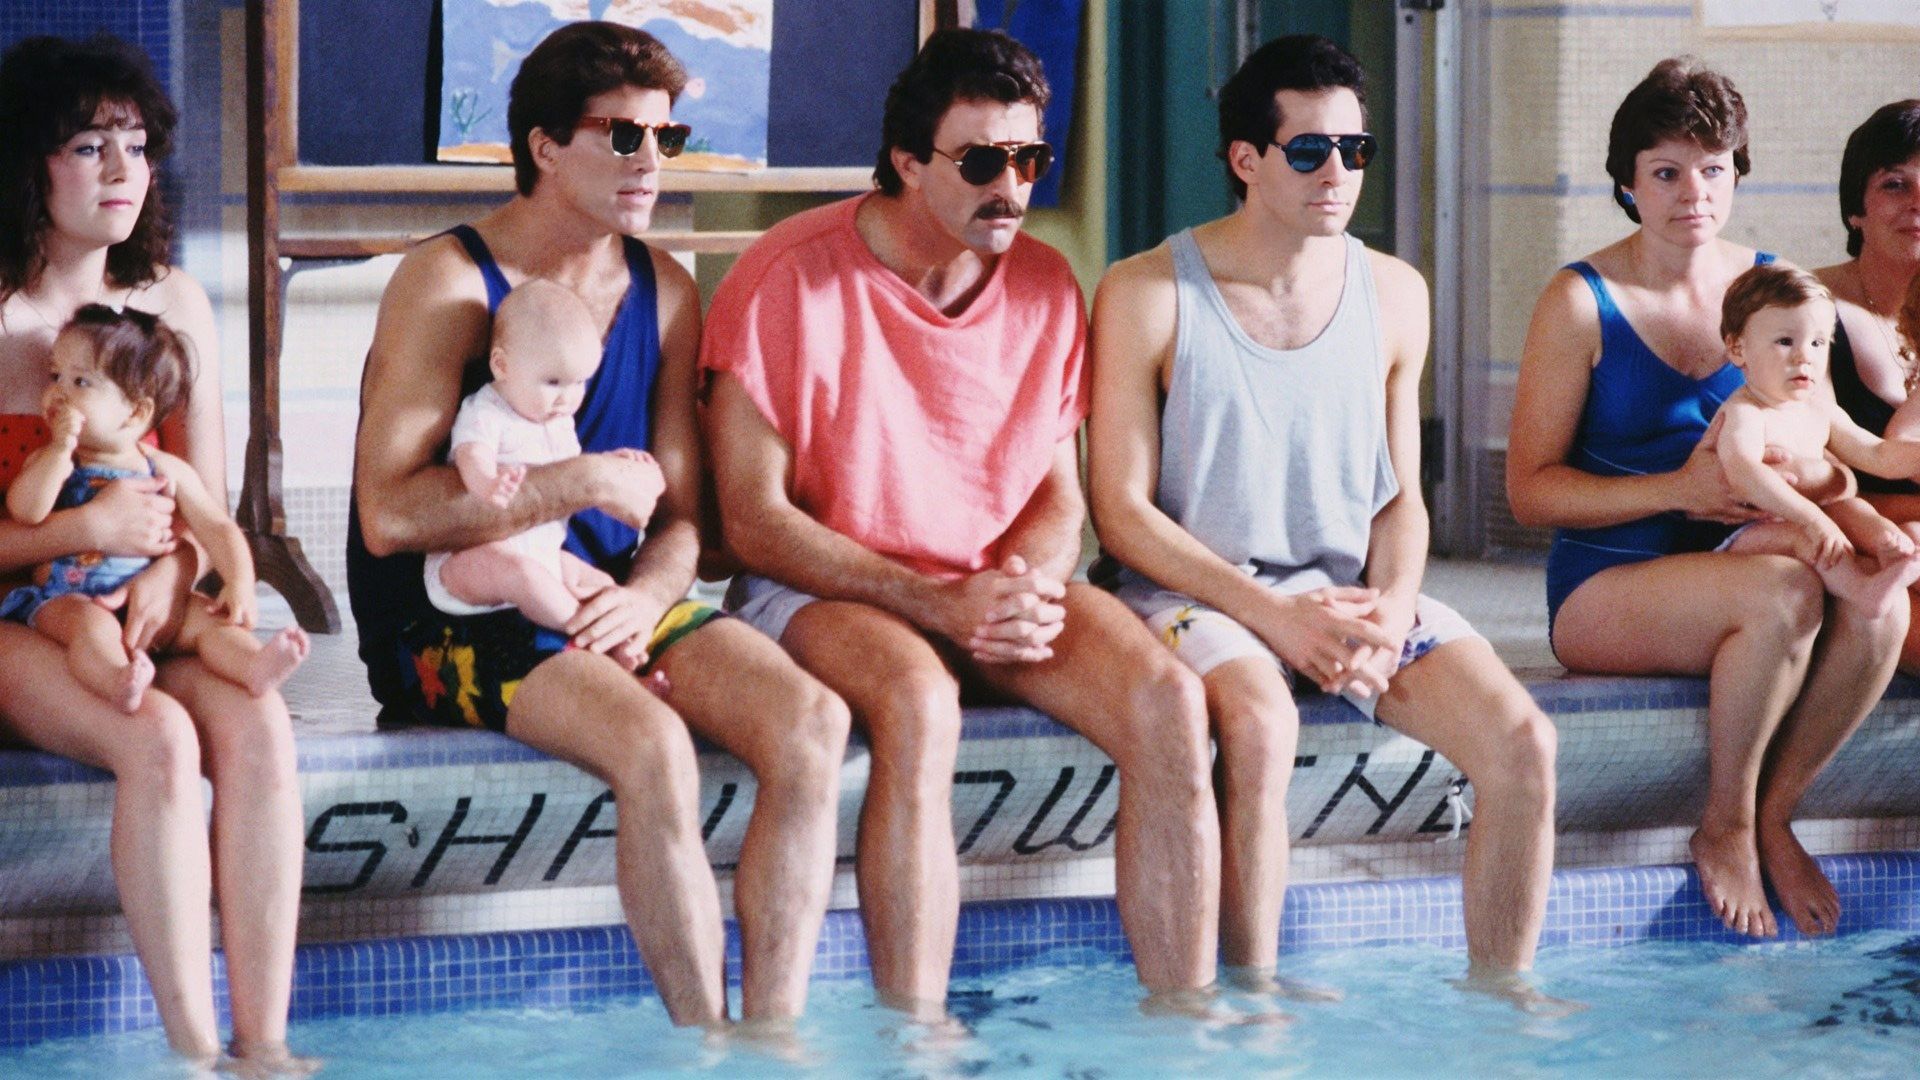 Three Men and a Baby background